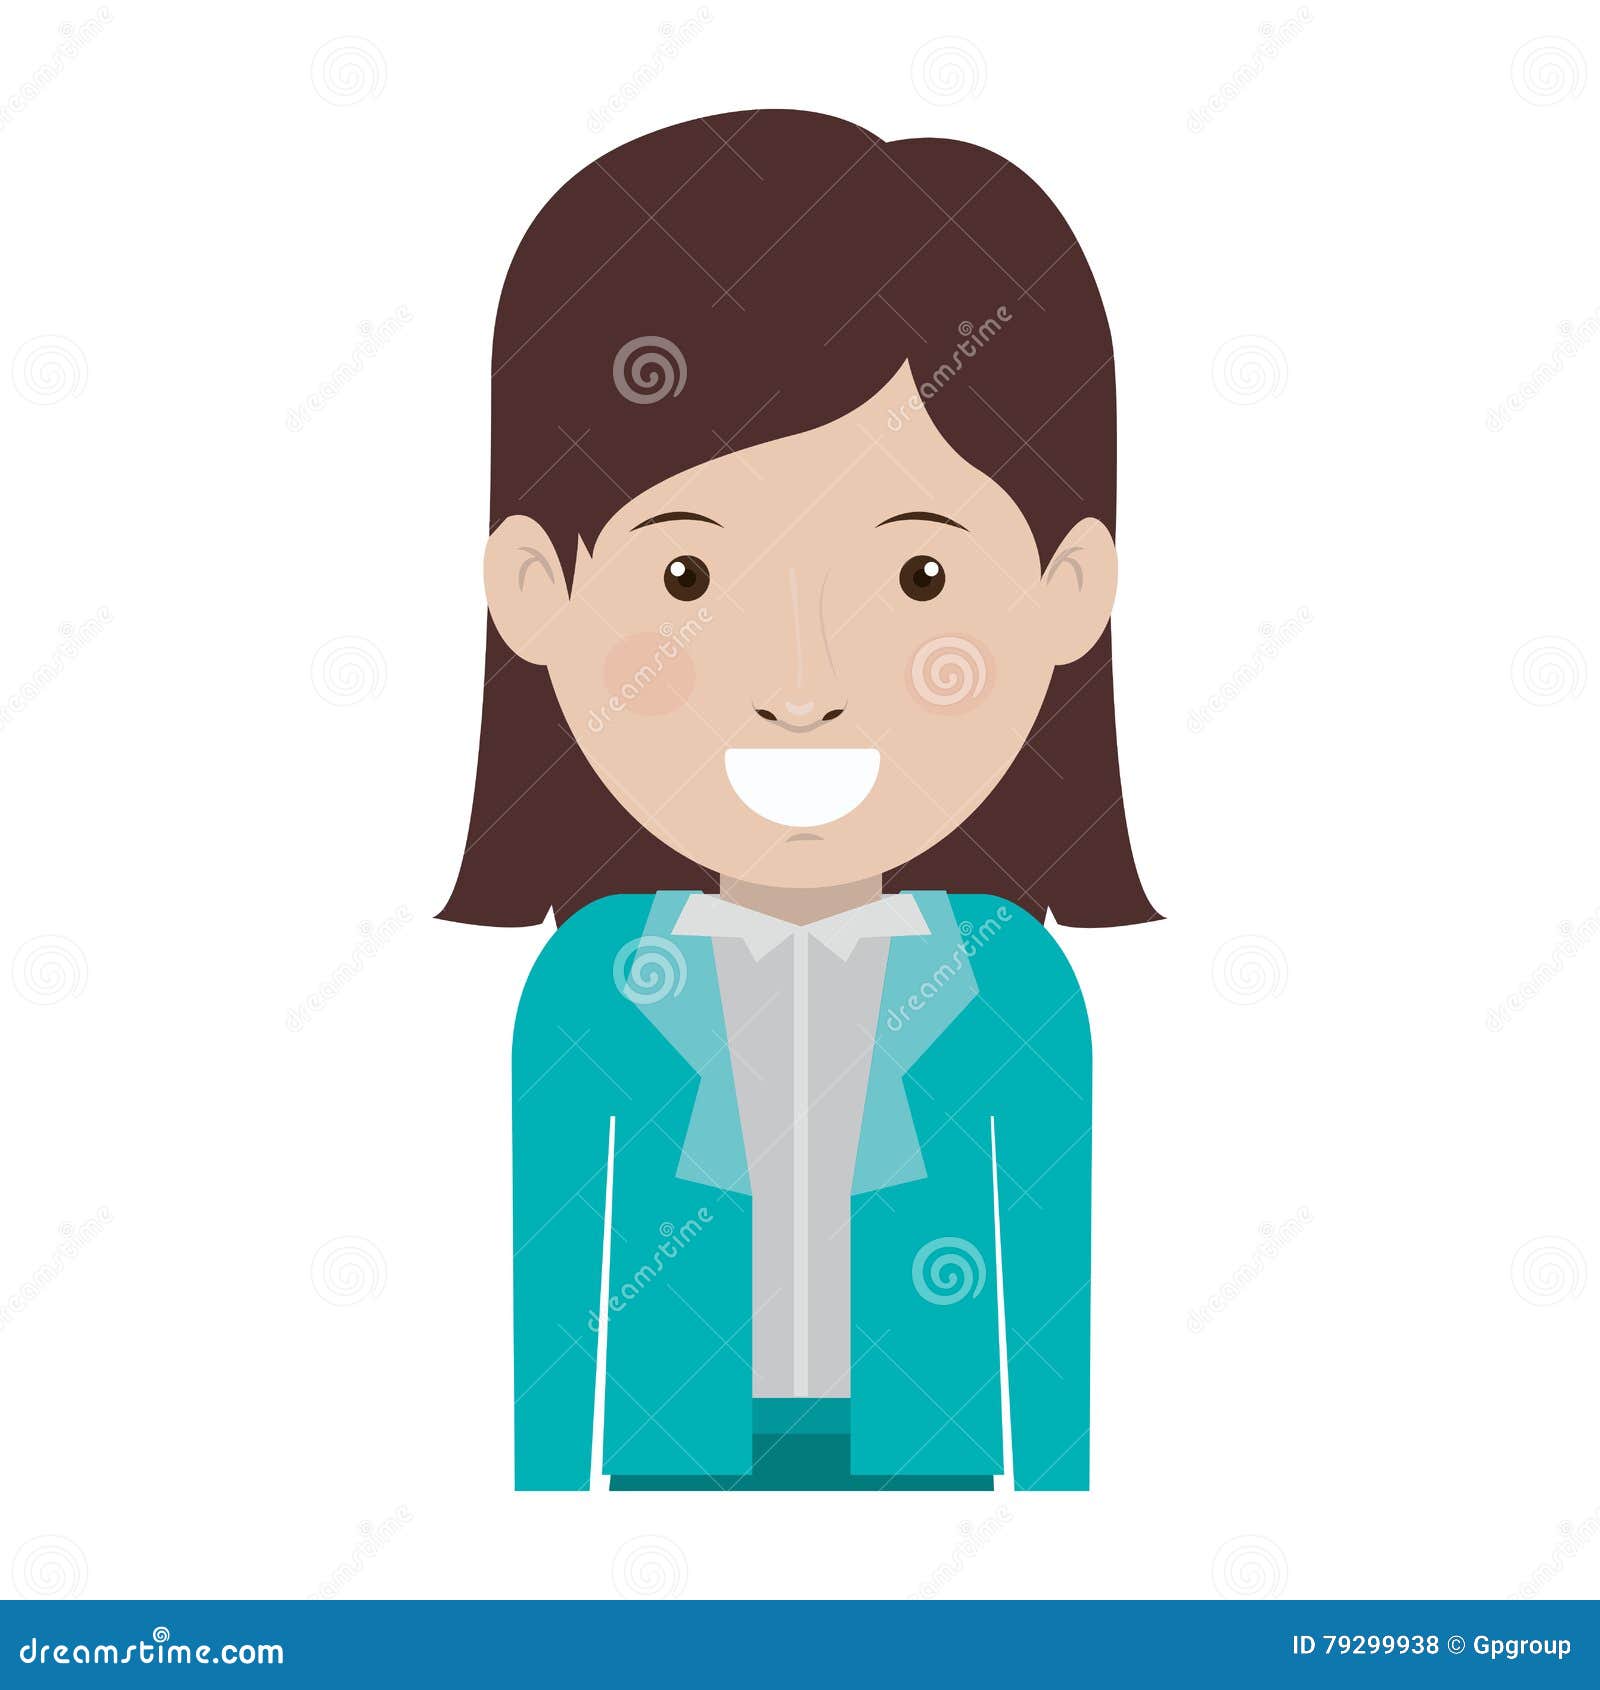 Avatar woman smiling stock vector. Illustration of pretty - 79299938